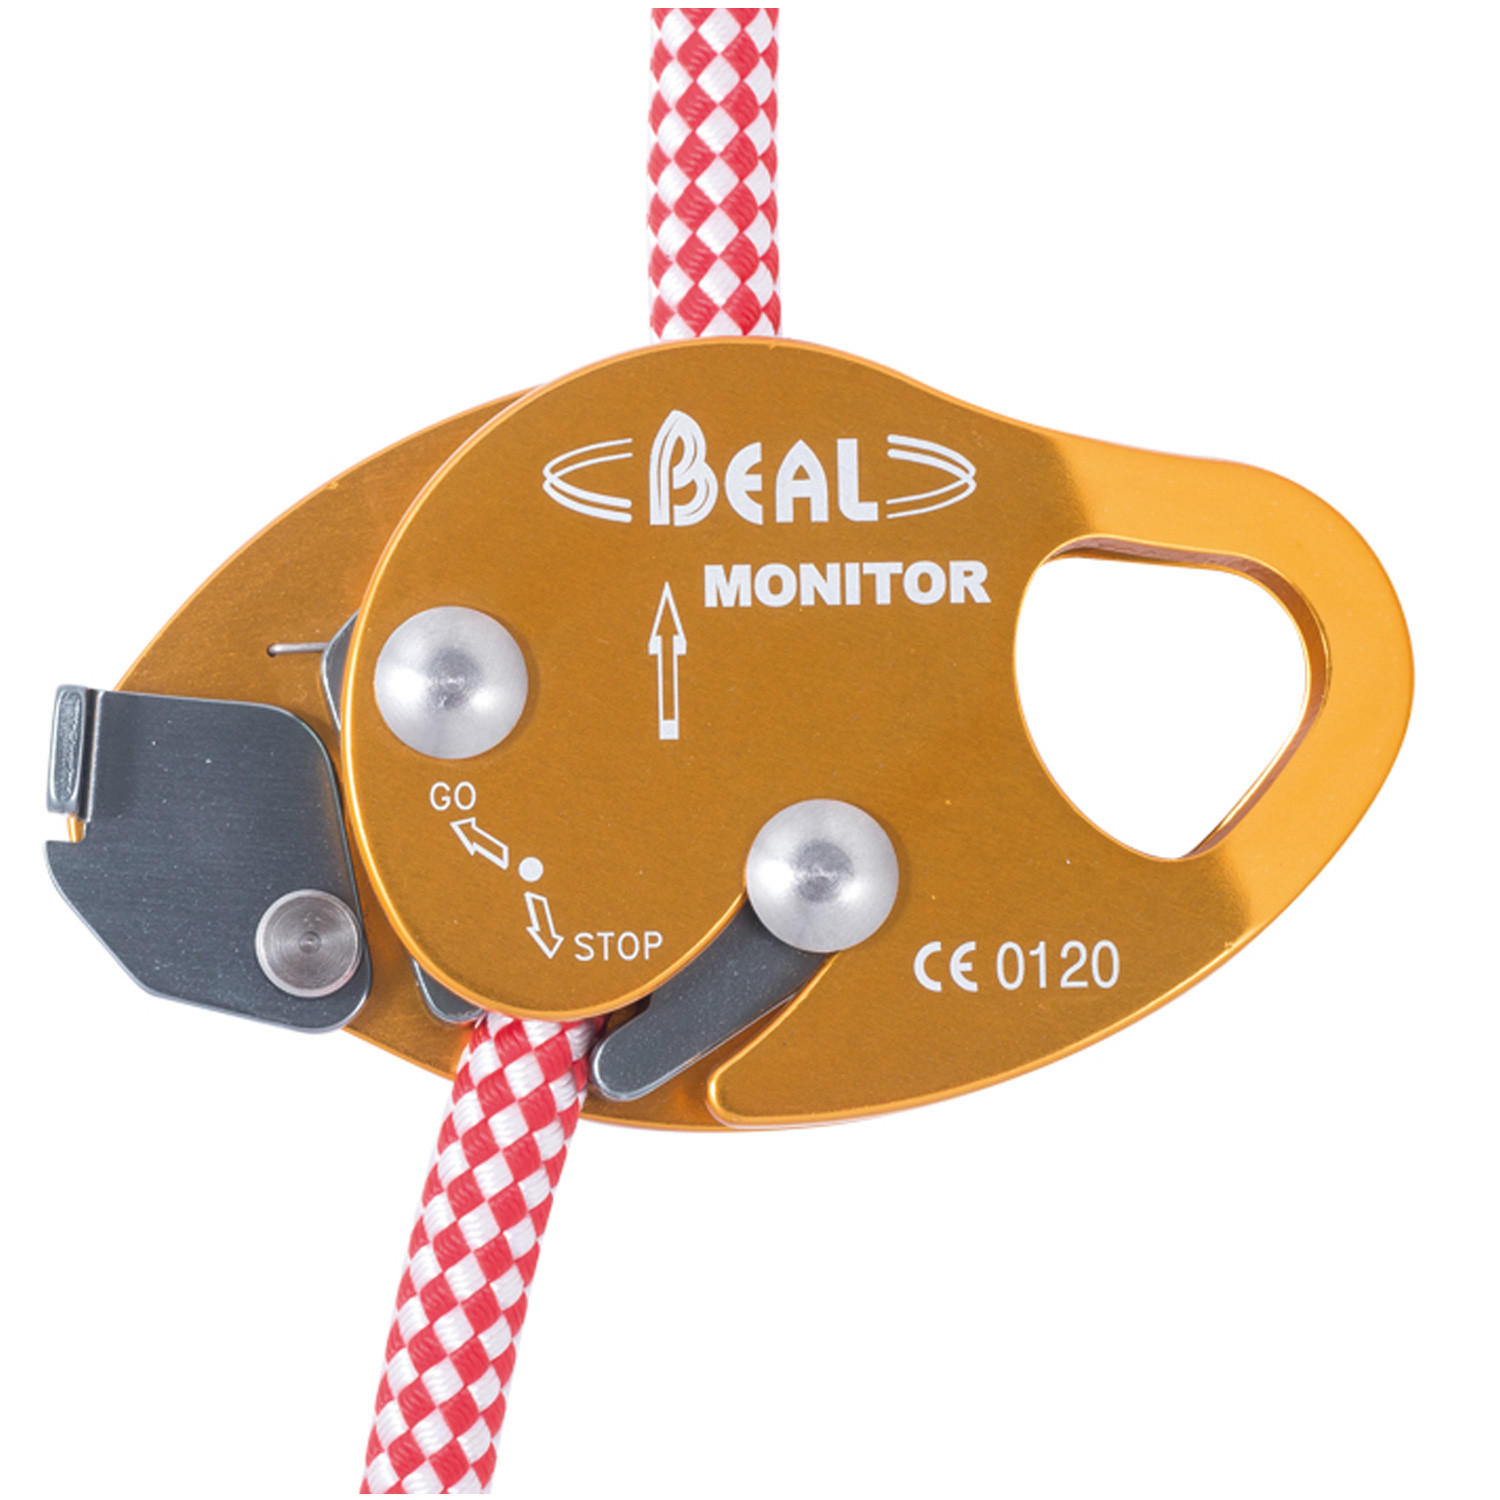 Beal Monitor Mobile Fall Arrest Device